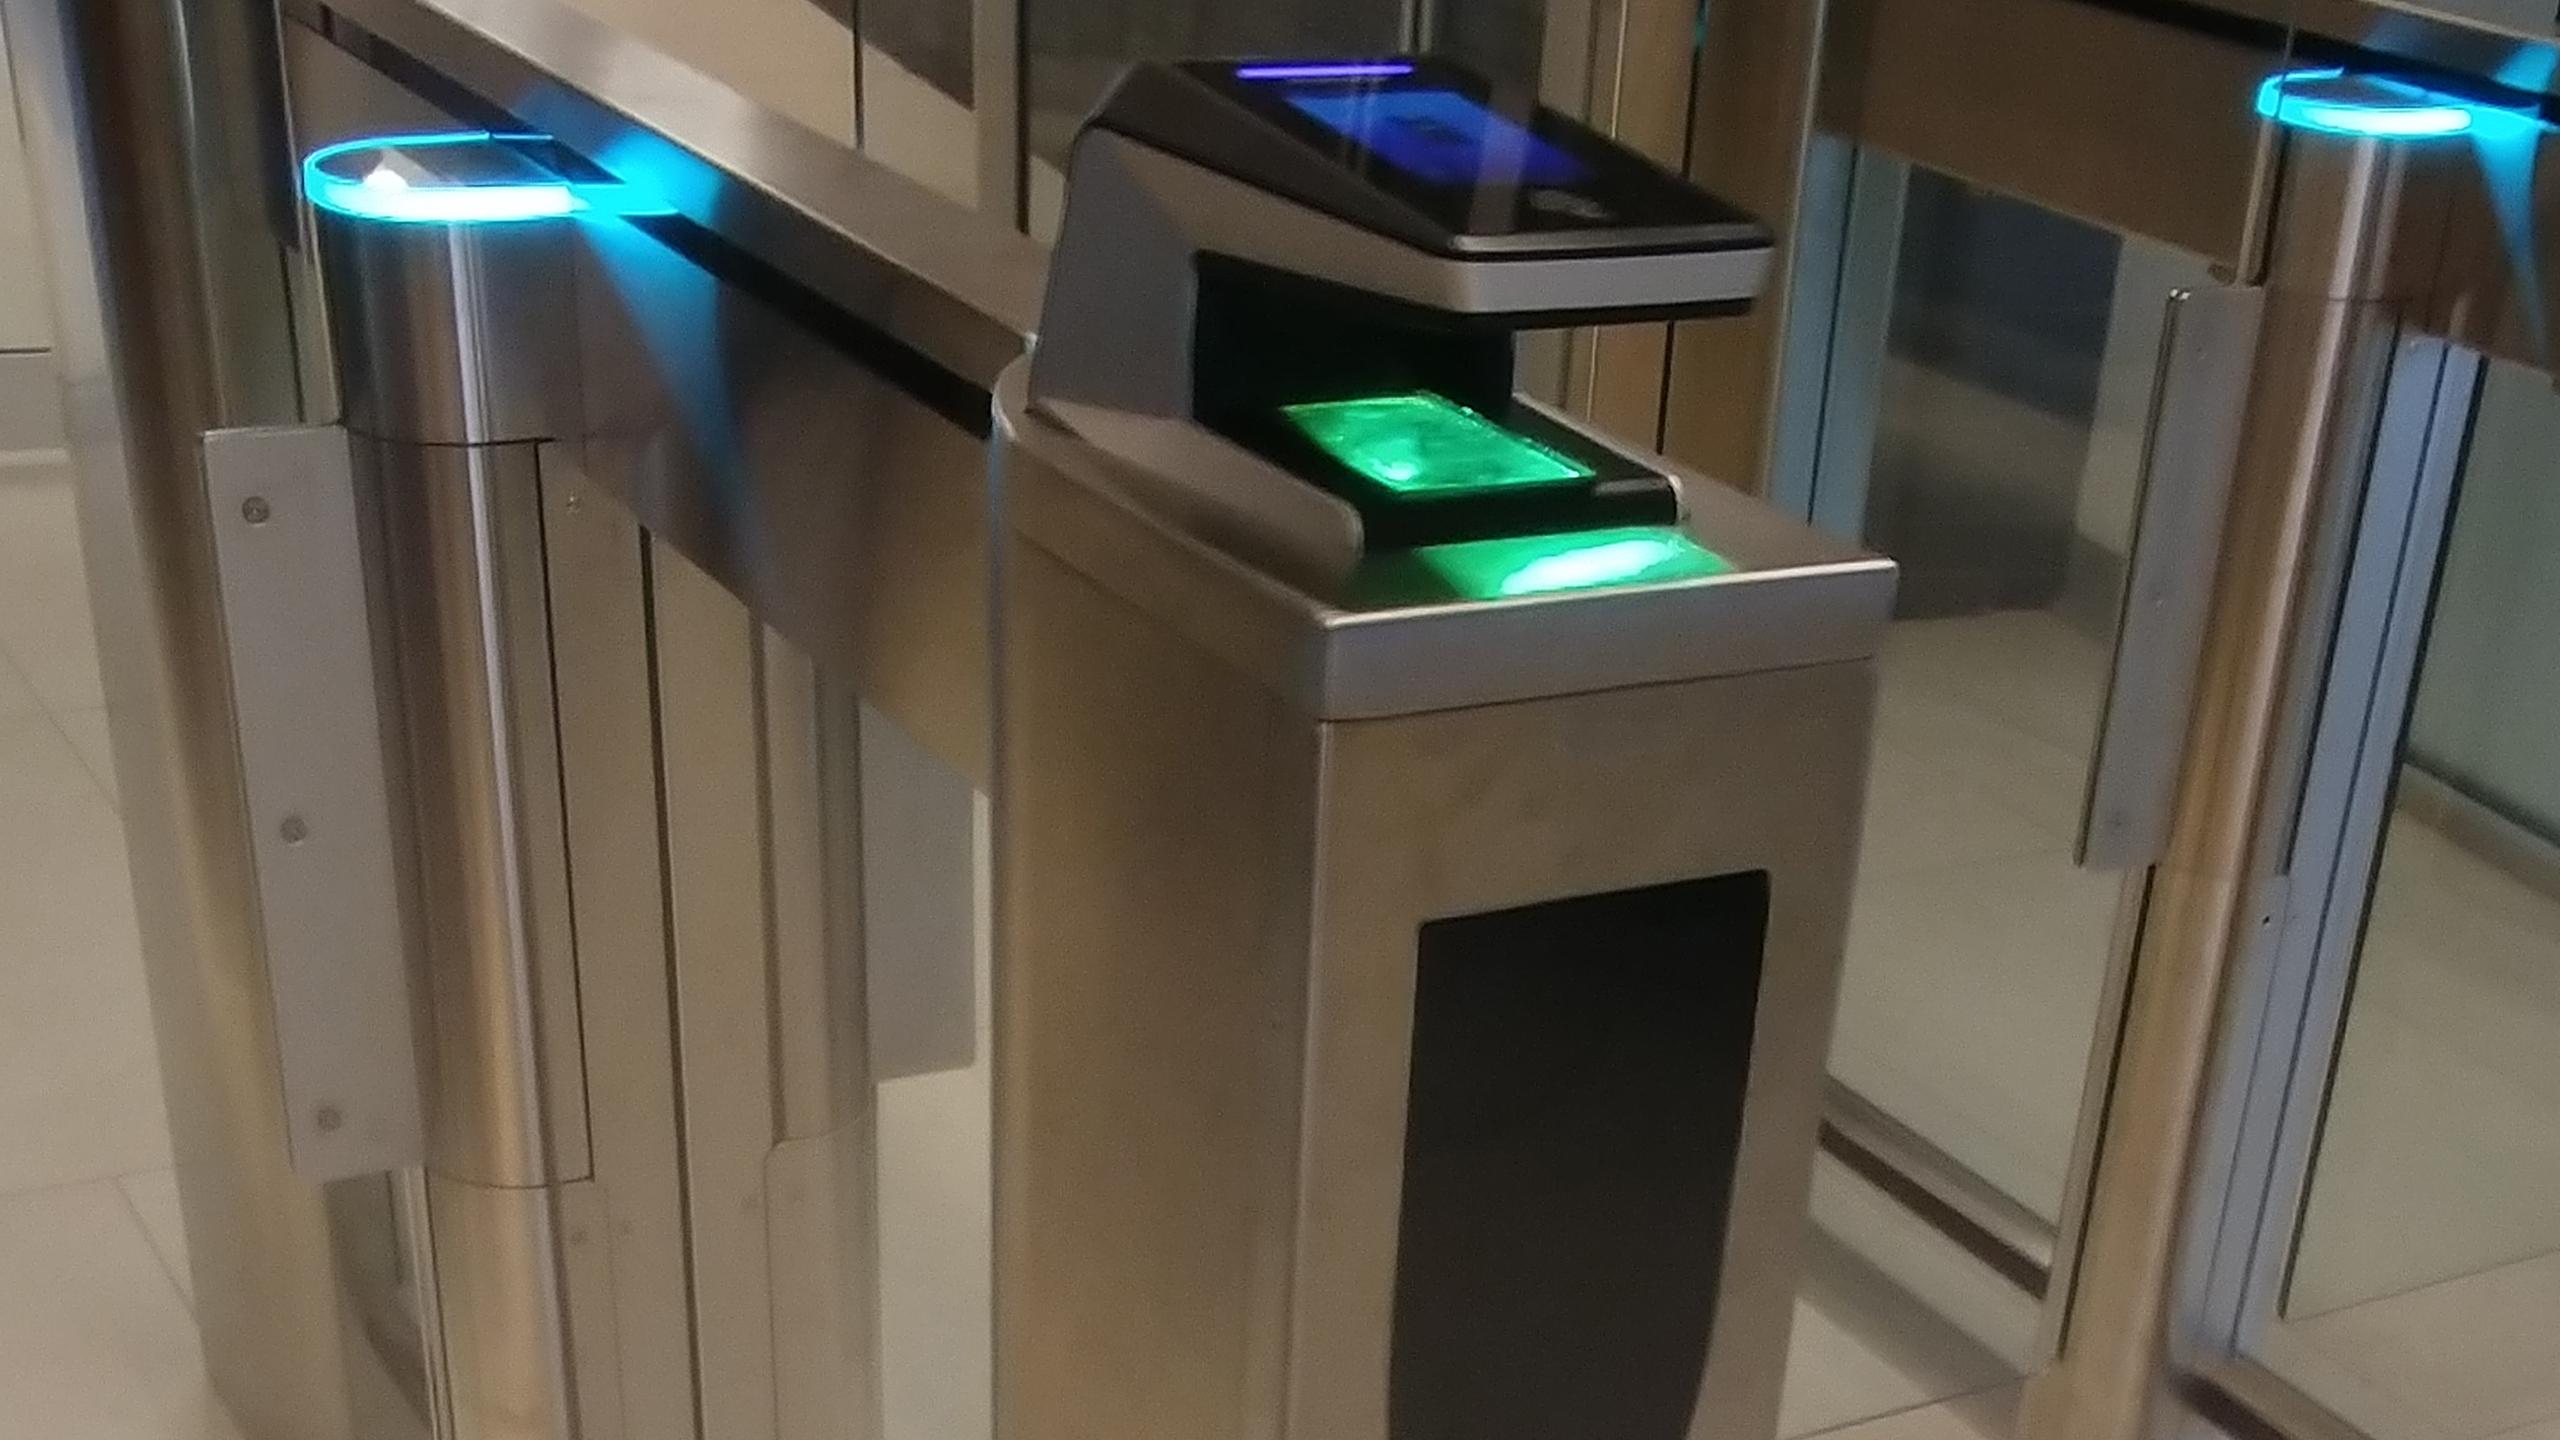 A photo of the biometric scanner in the HOEM building, a metal machine with a green and blue light scanner